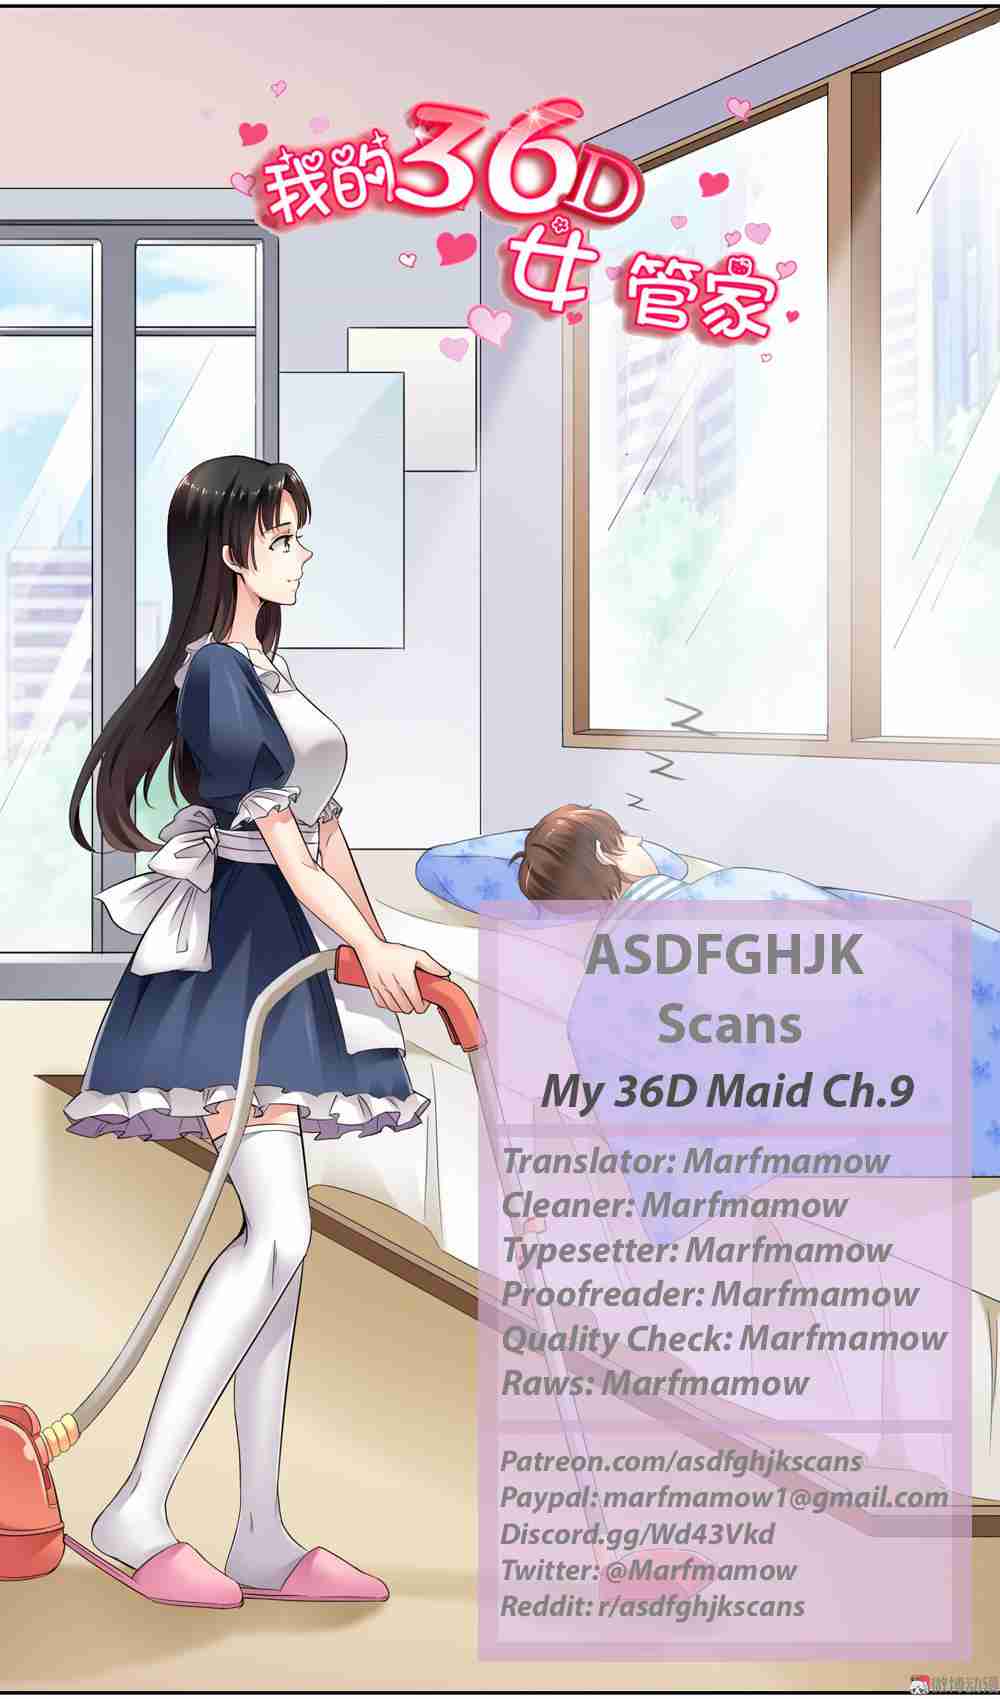 My 36D Maid Ch. 9 Cramming on the bus is quite blissful!